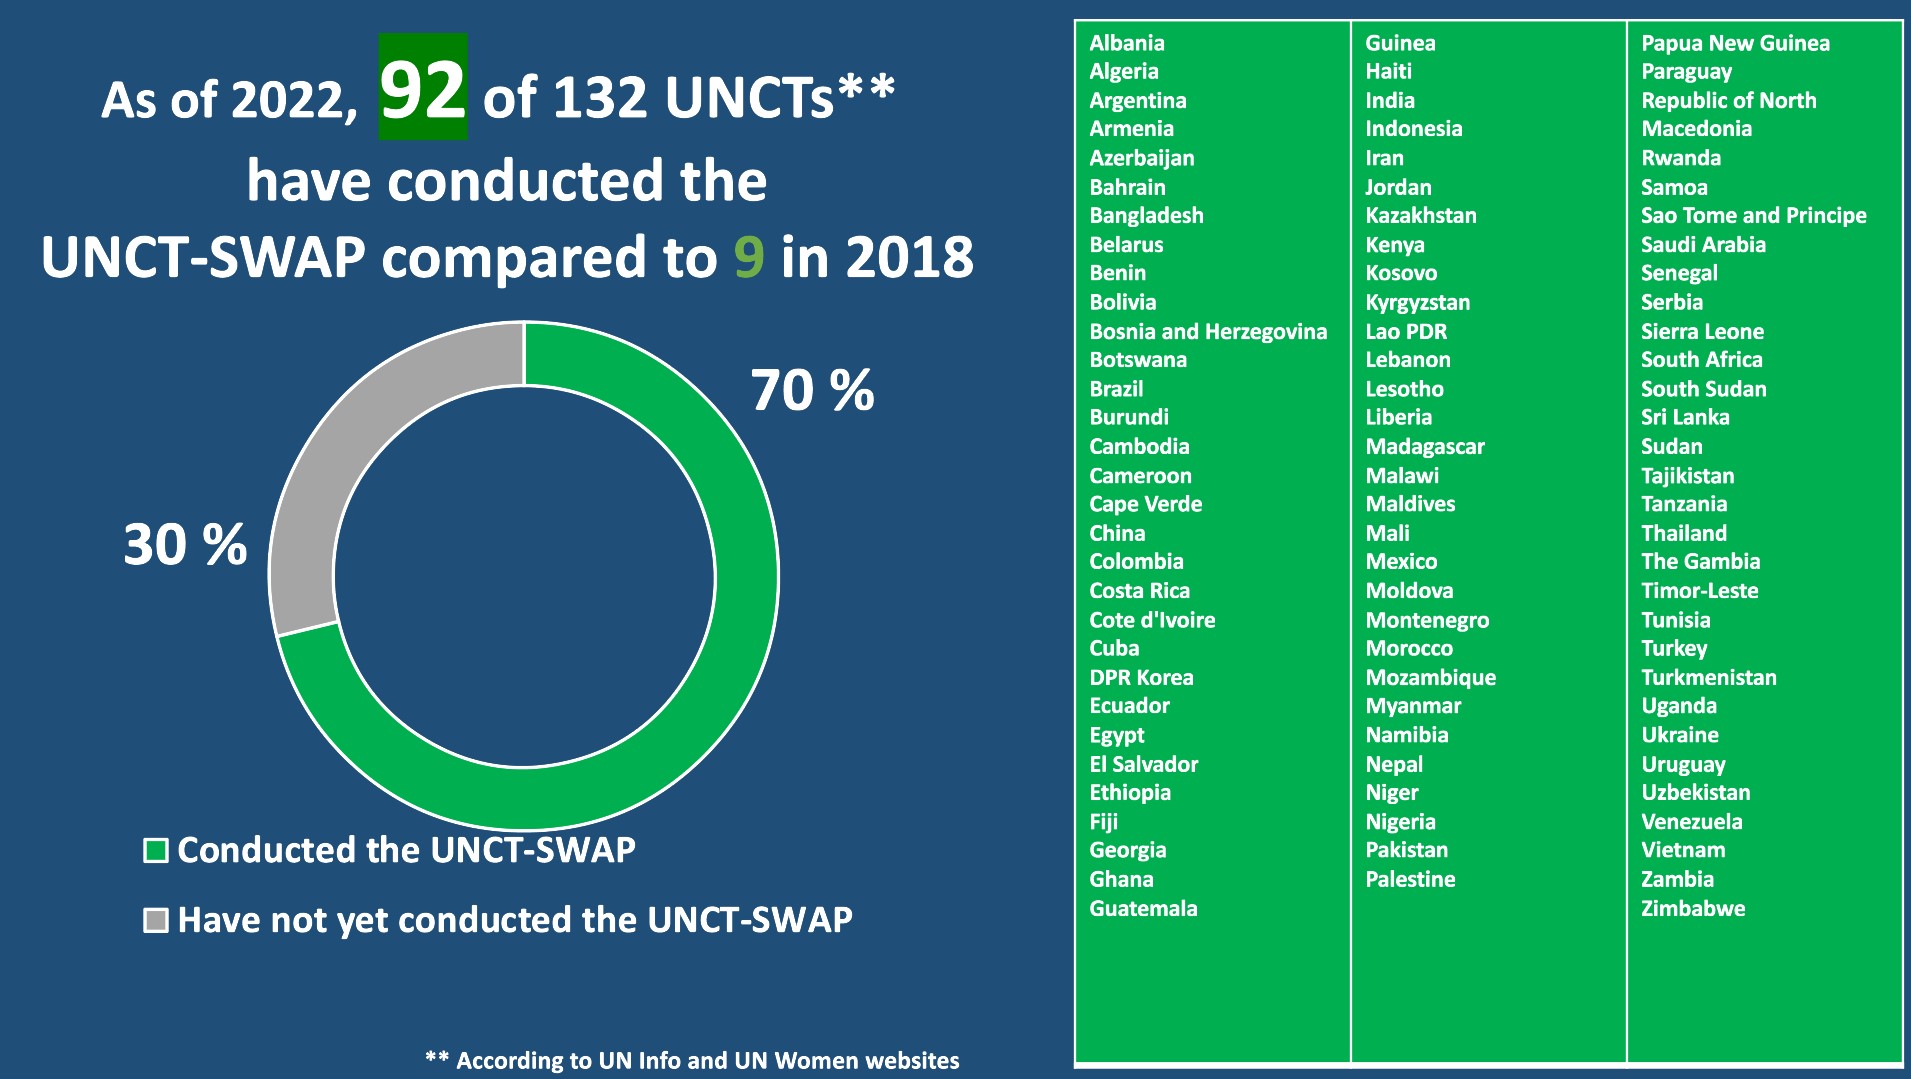 Overall 2022 UNCT SWAP Implementation Coverage